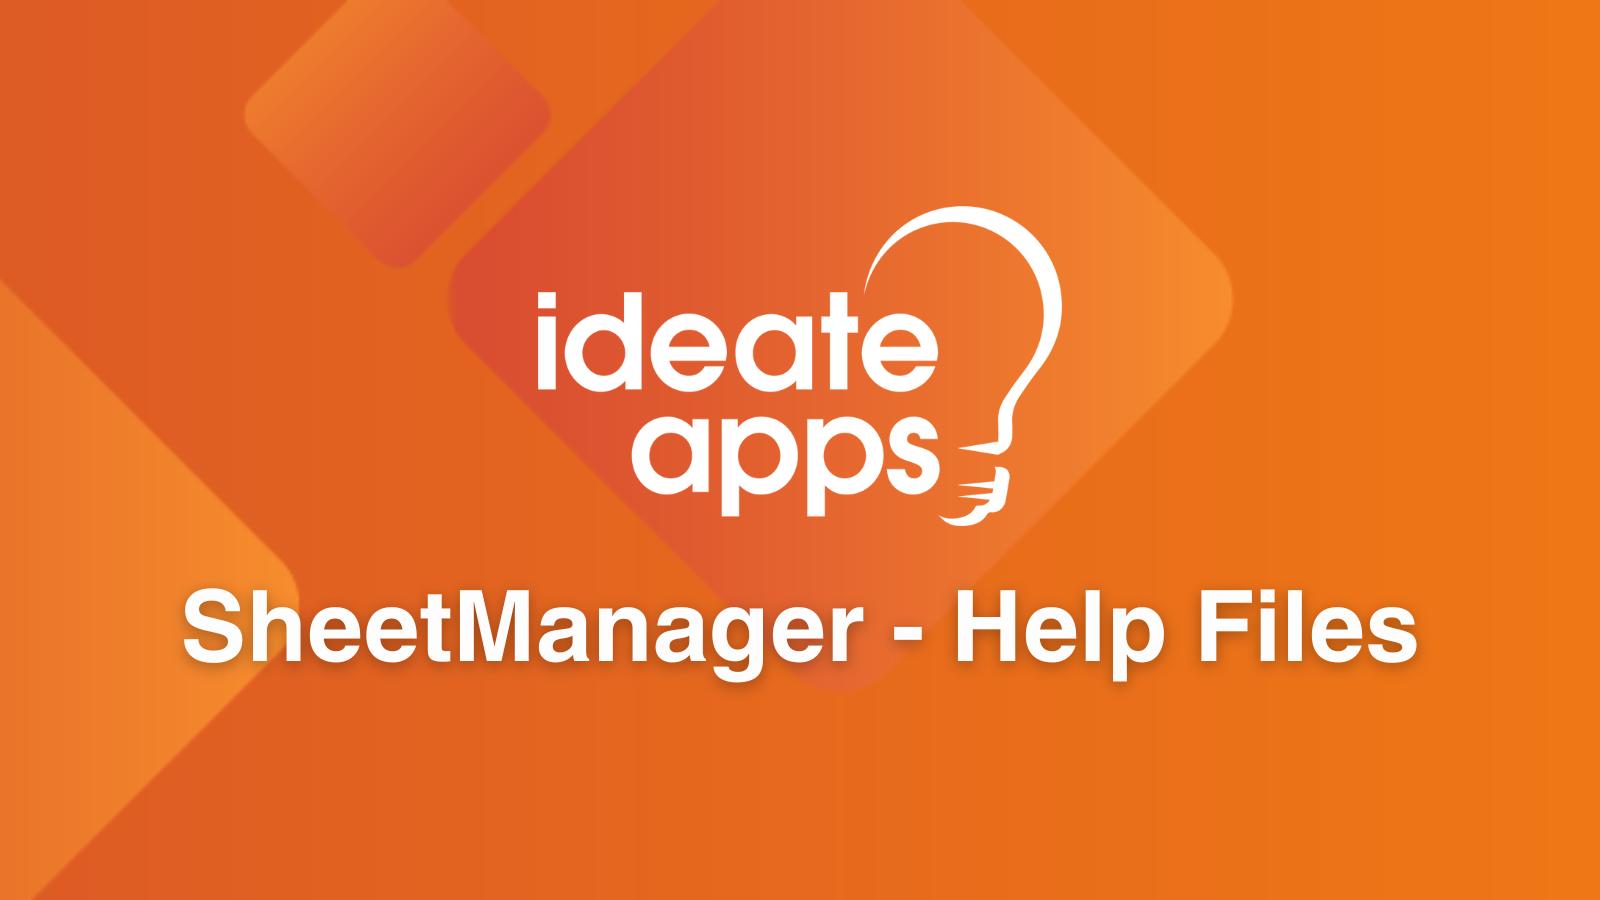 Search IdeateApps SheetManager Help Files